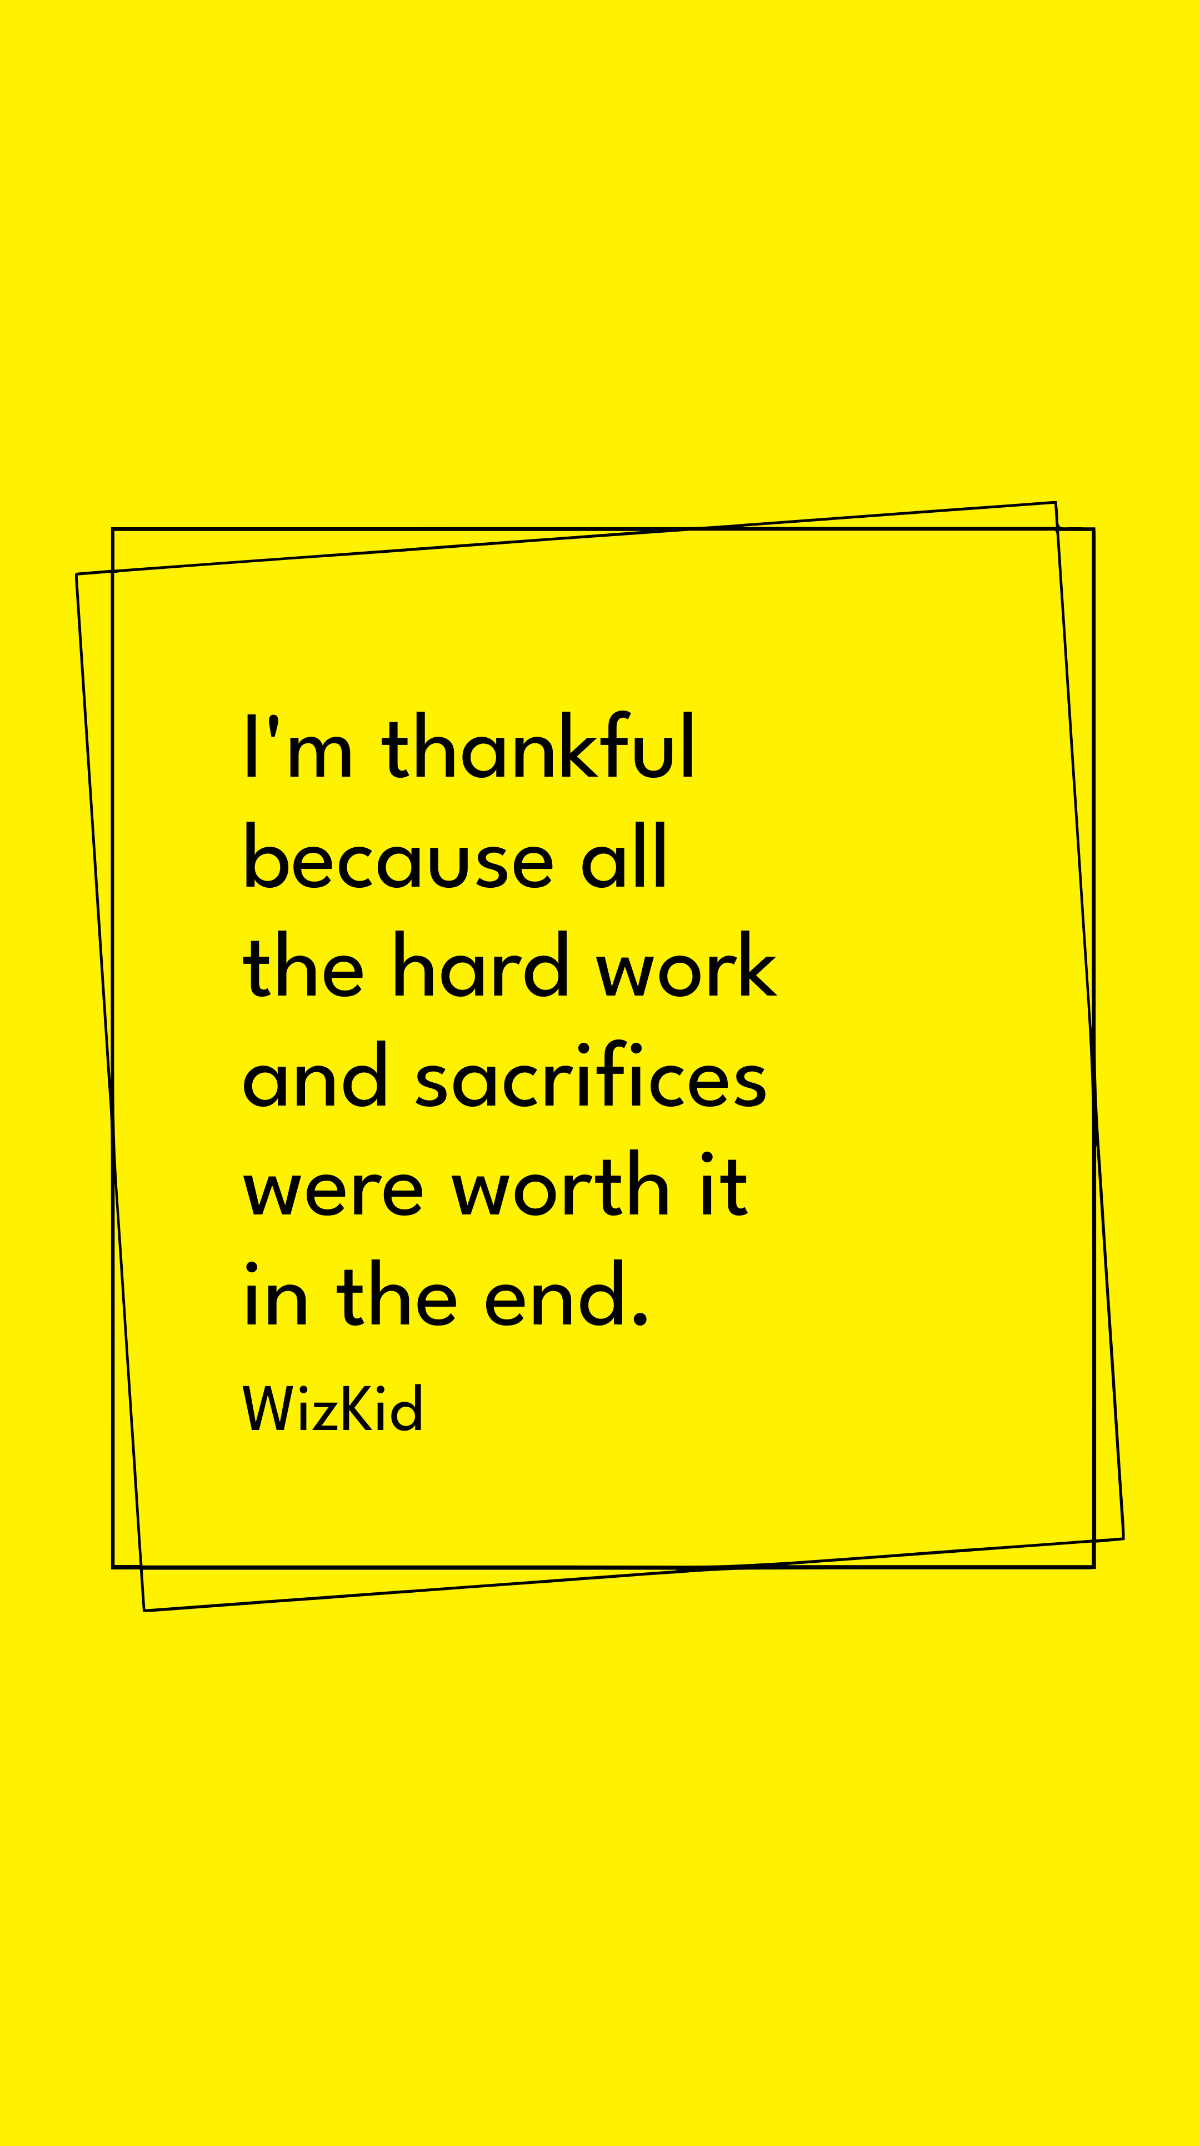 WizKid - I'm thankful because all the hard work and sacrifices were worth it in the end.